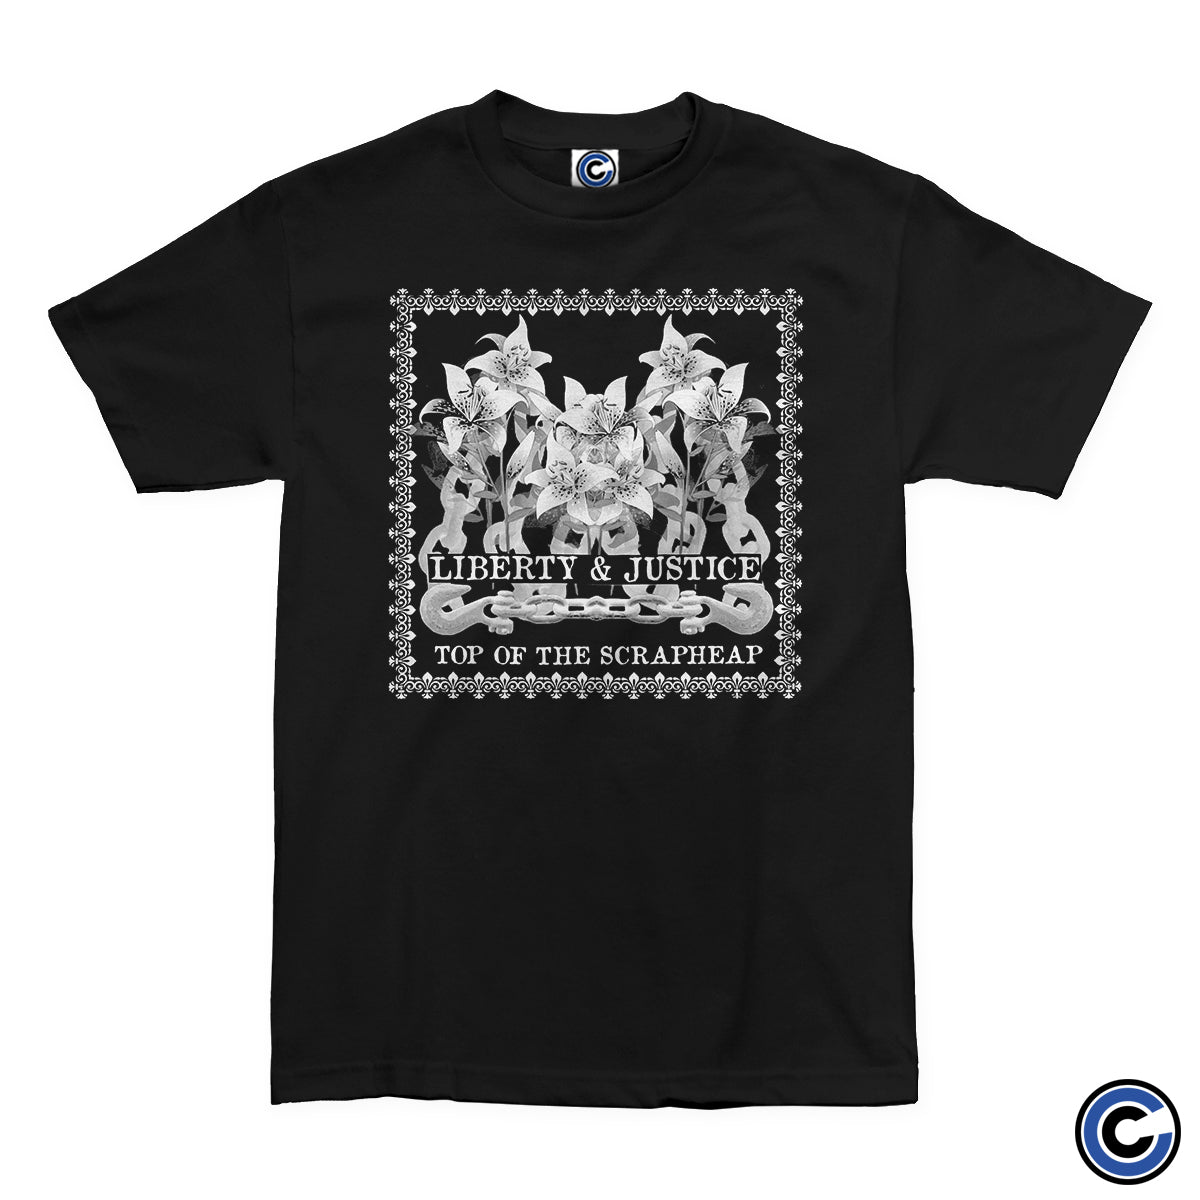 Liberty and Justice "Scapheap" Shirt